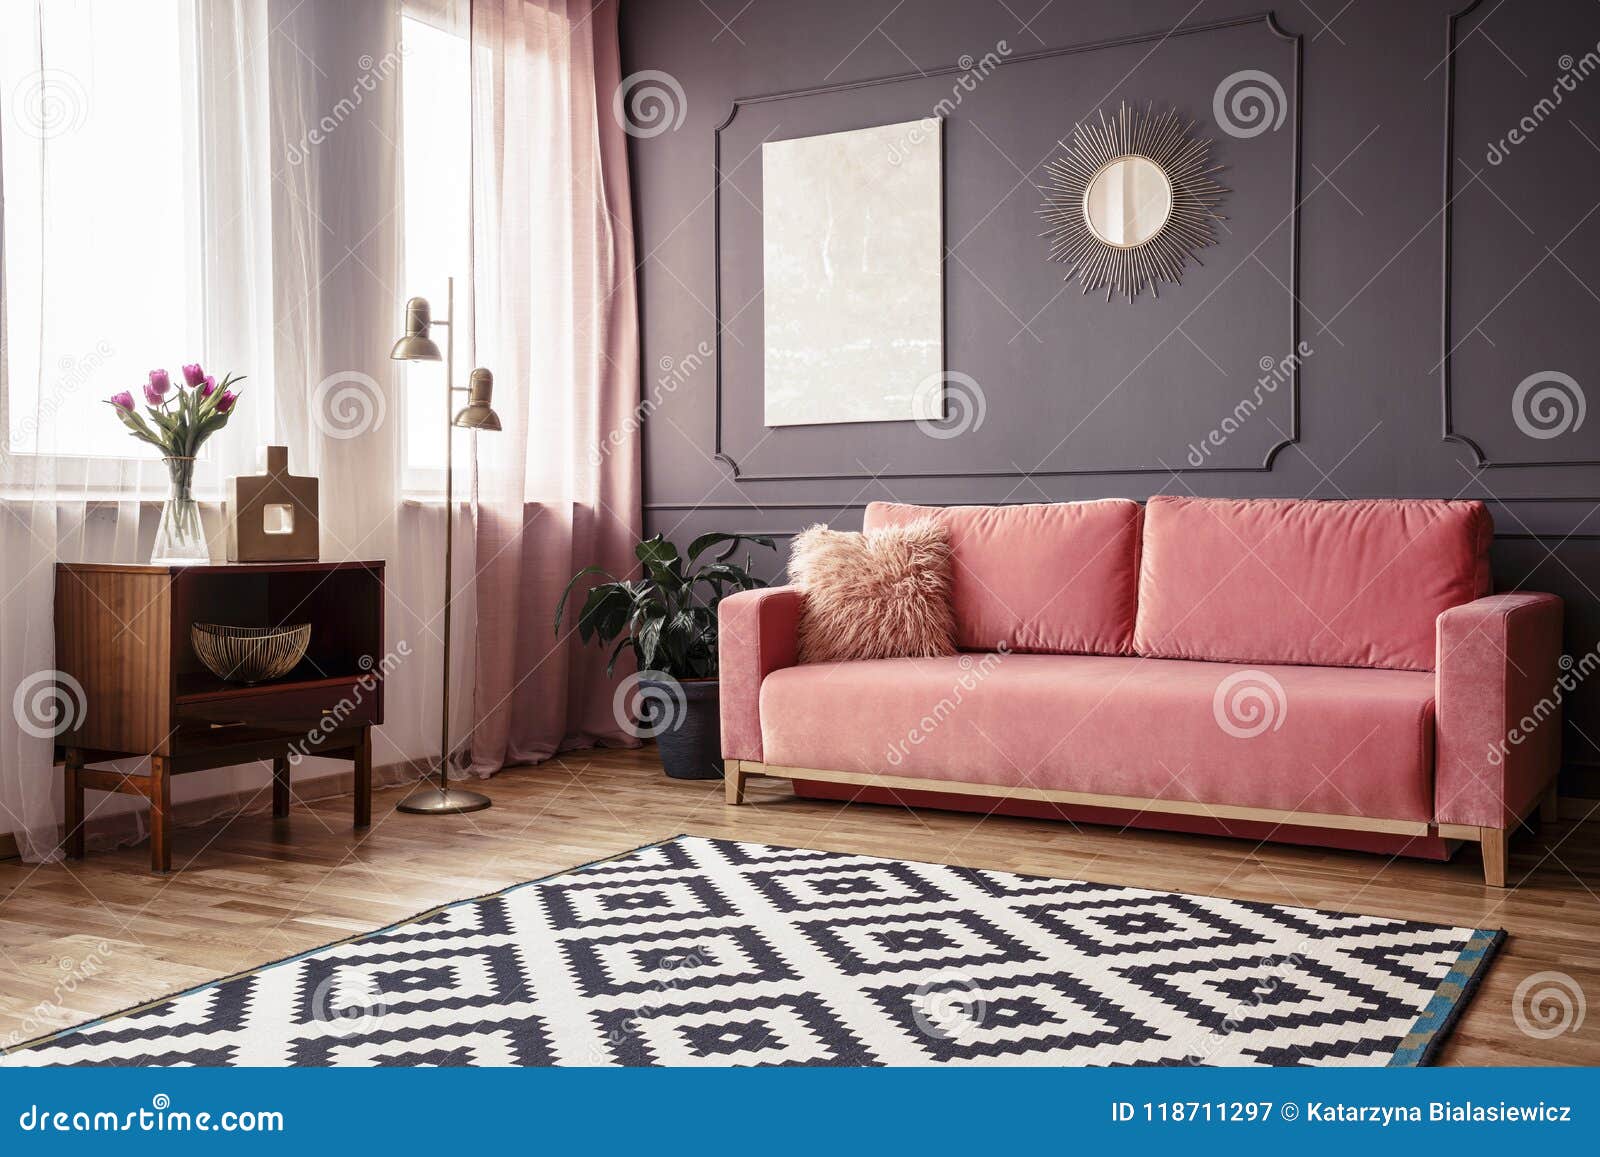 side angle of a living room interior with a powder pink sofa, pa